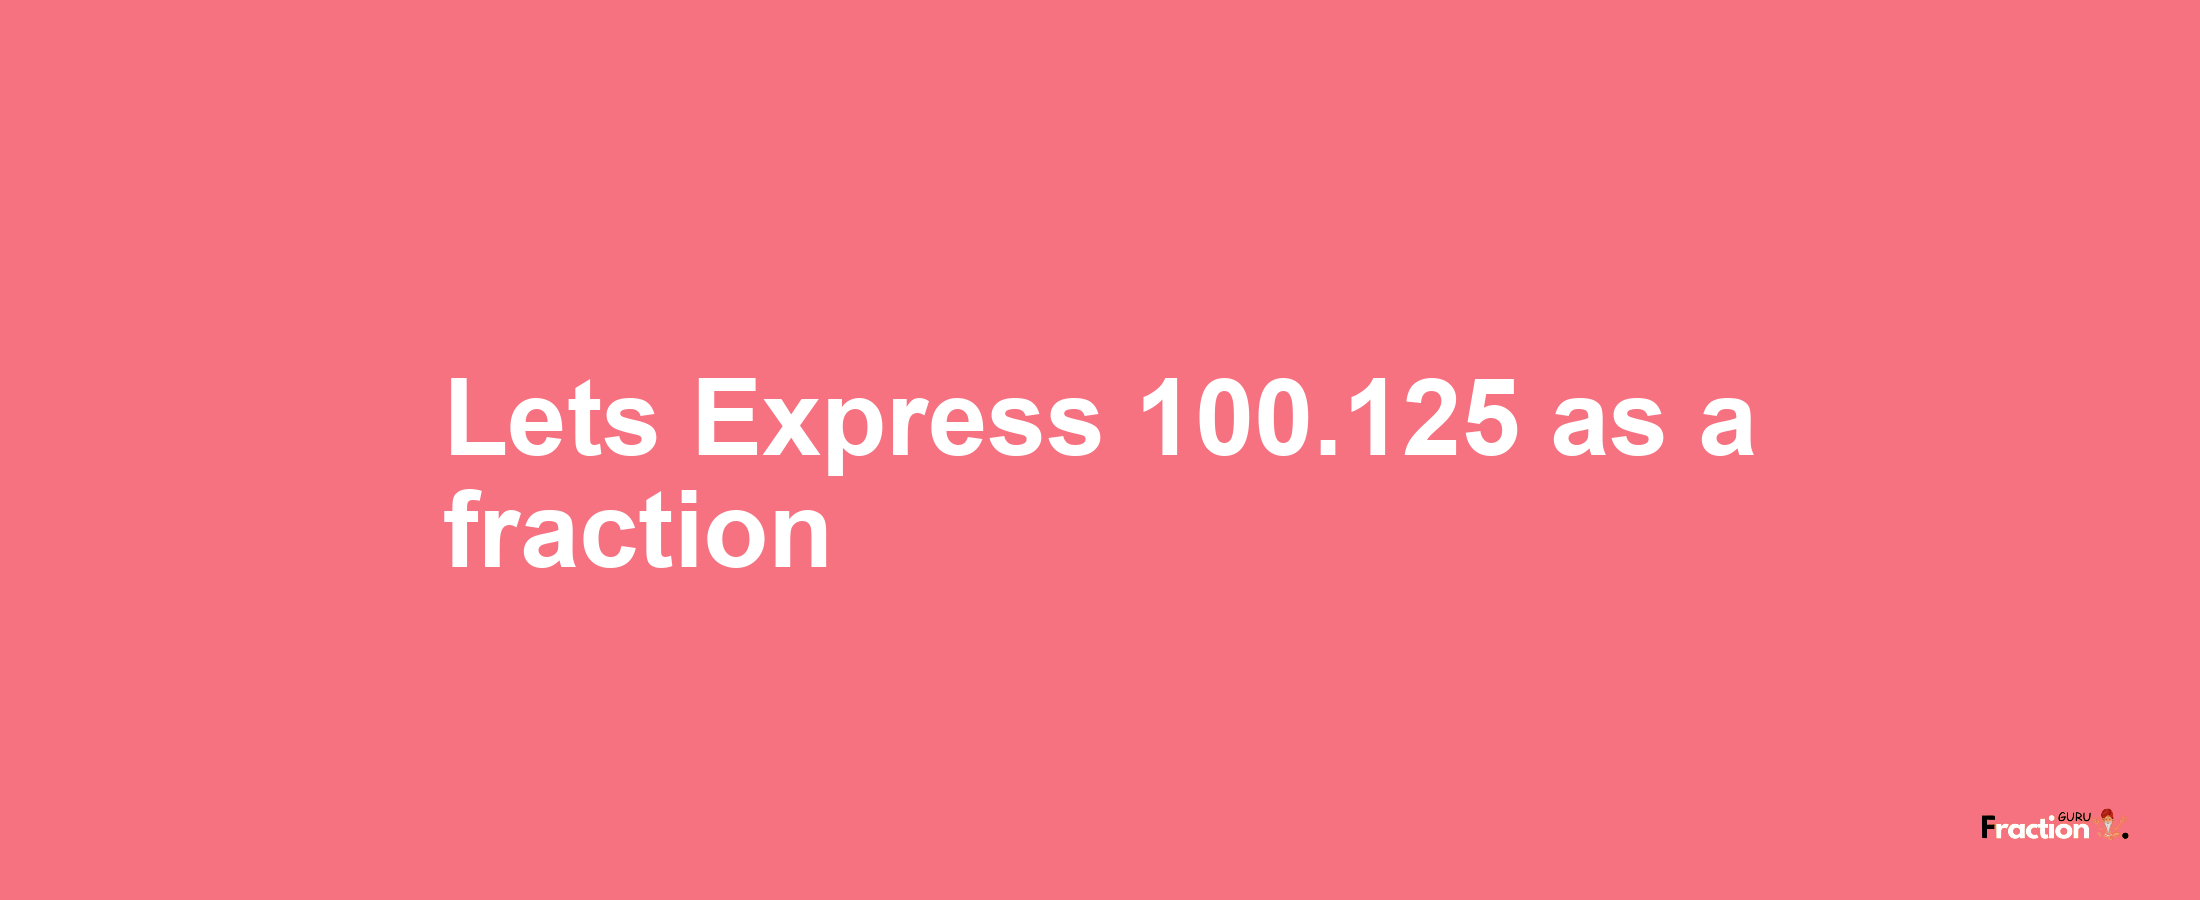 Lets Express 100.125 as afraction